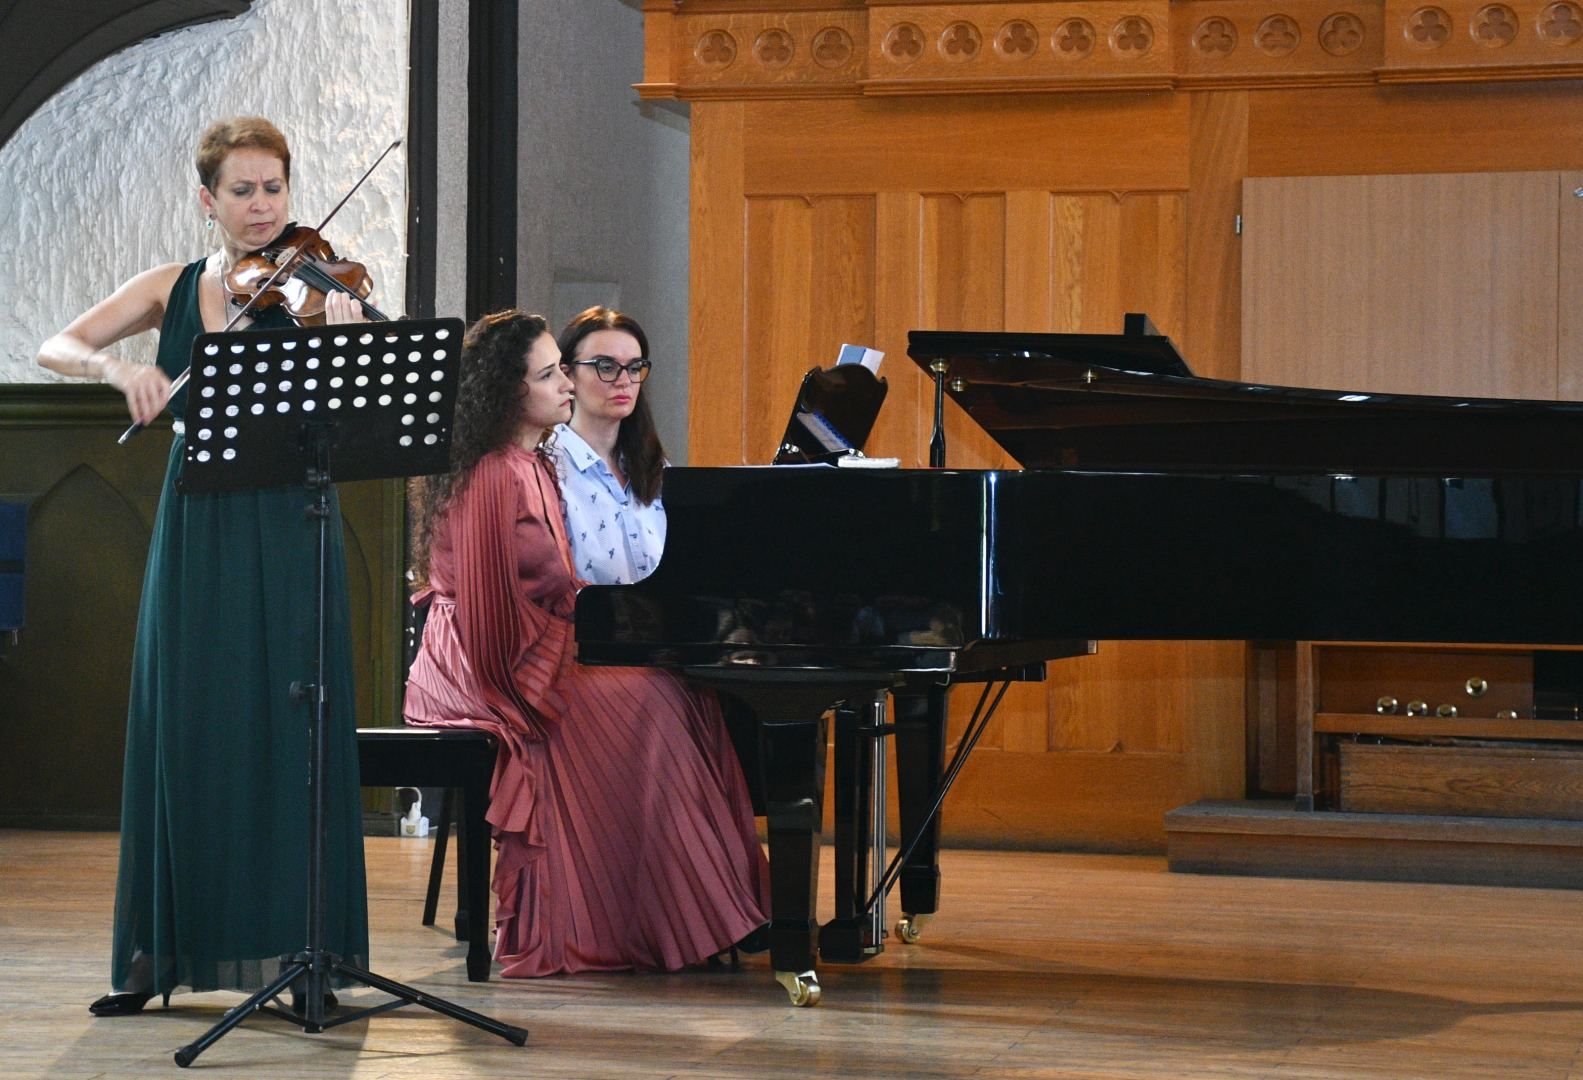 Musical tandem delights listeners with chamber music [PHOTO]